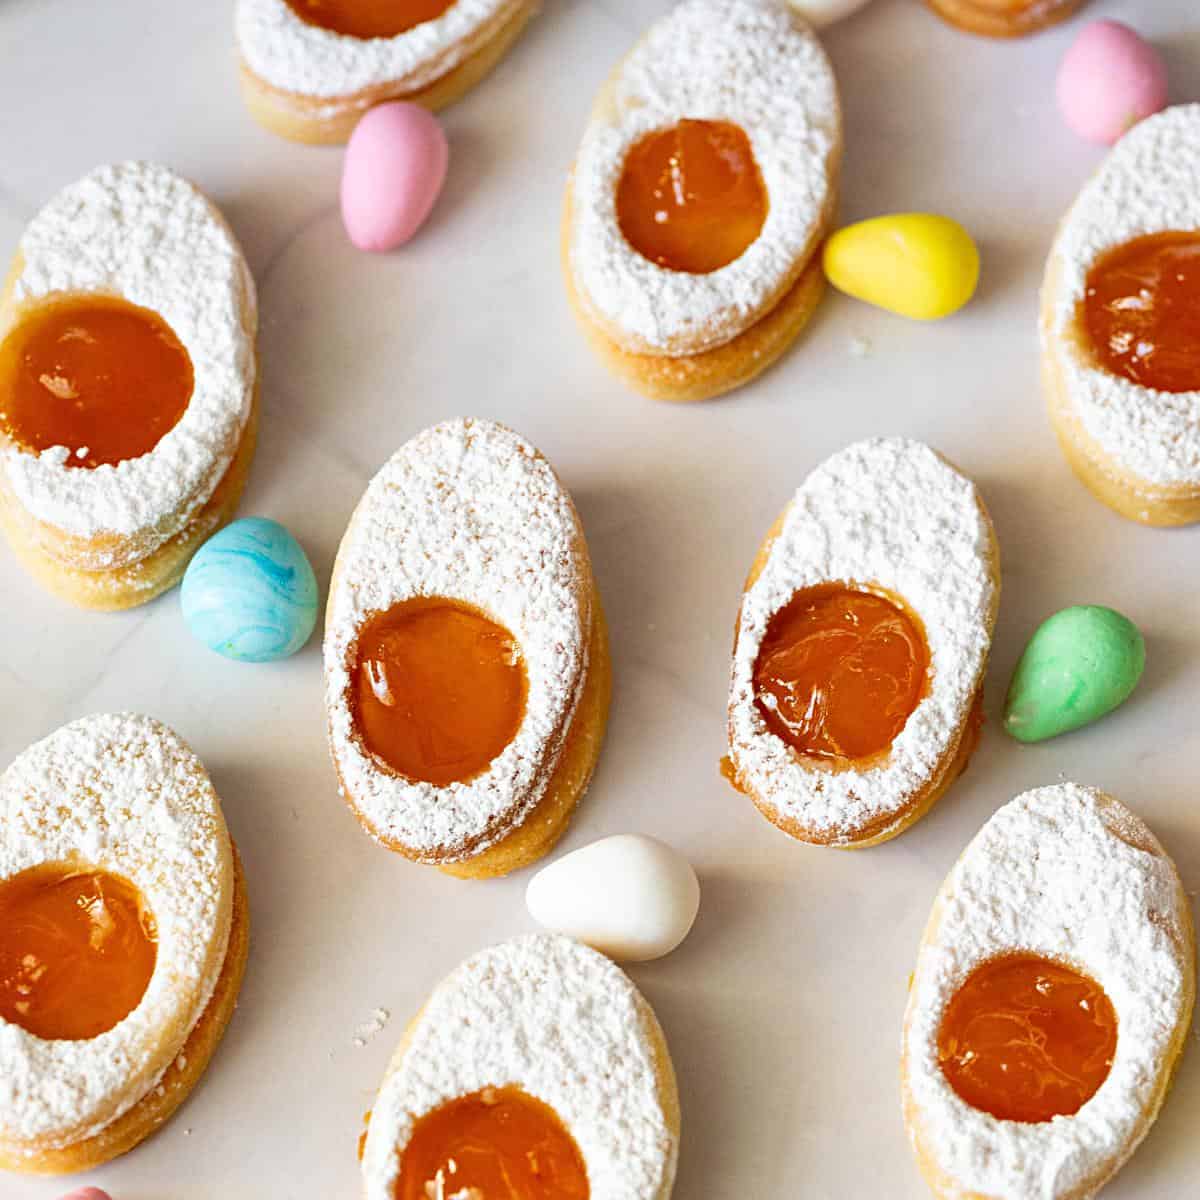 Oval cookies with apricot jam on a plate.